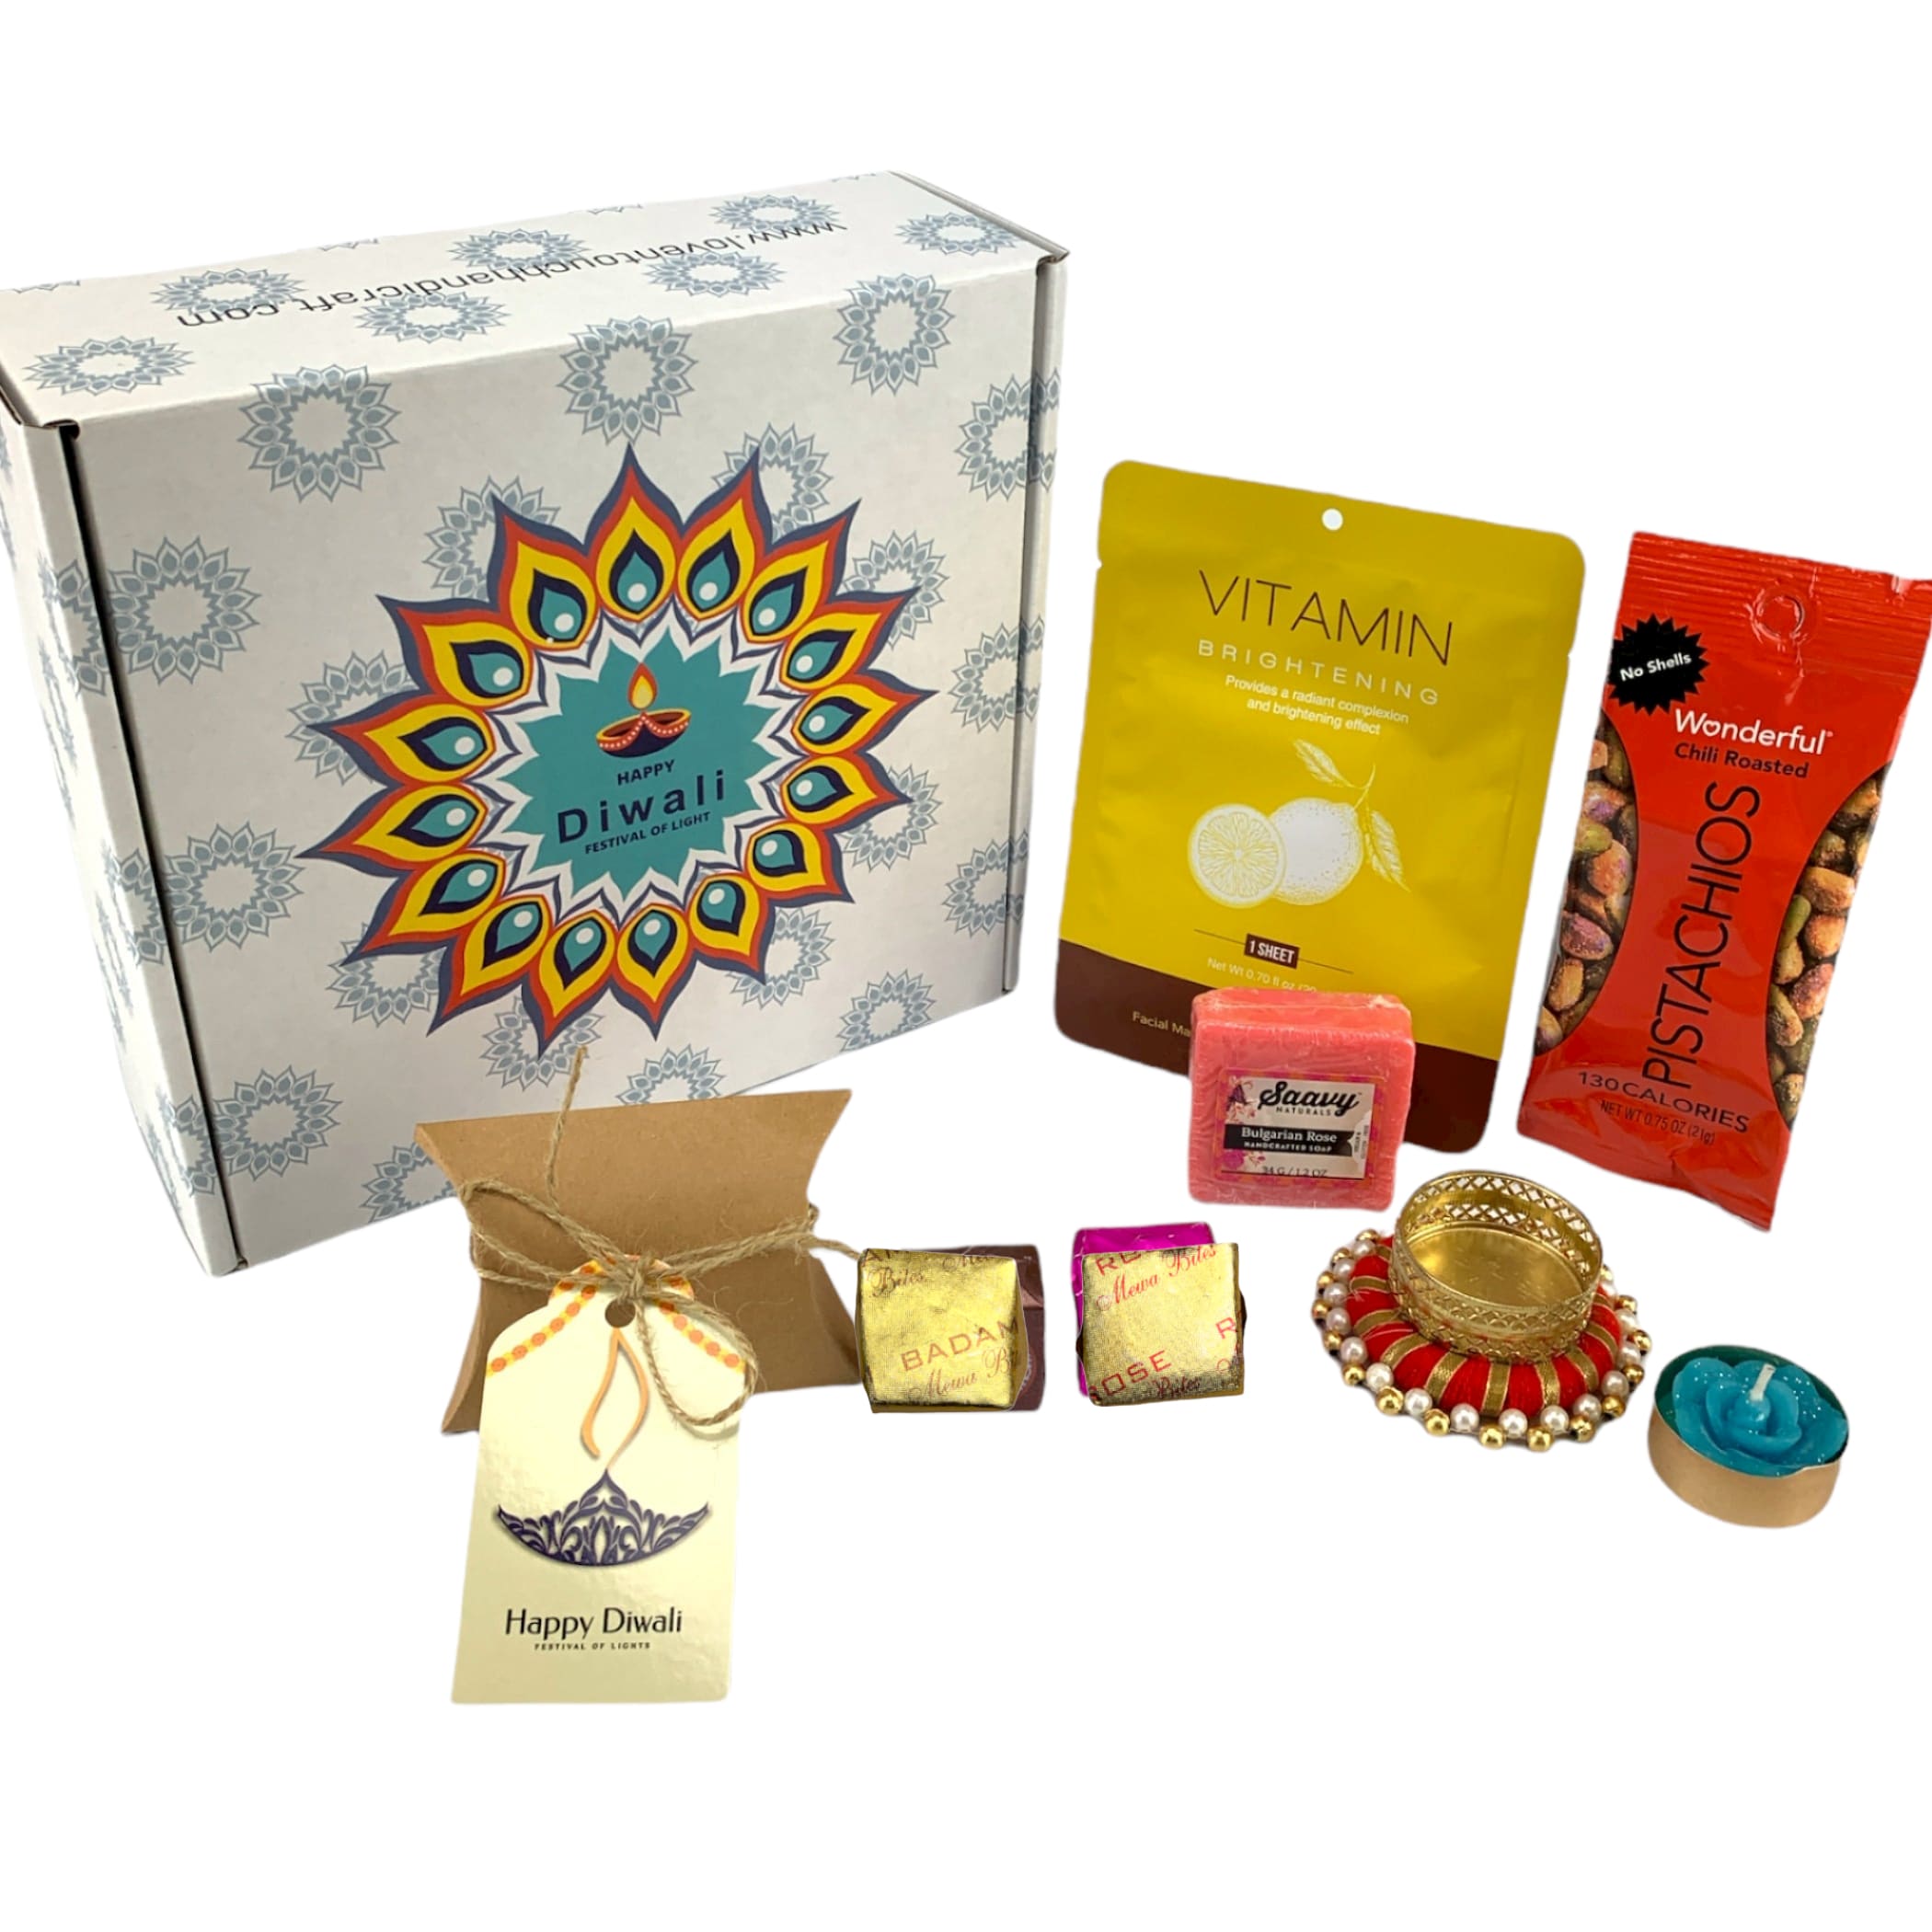 Diwali gift for her personalize gifts boxes navratri box